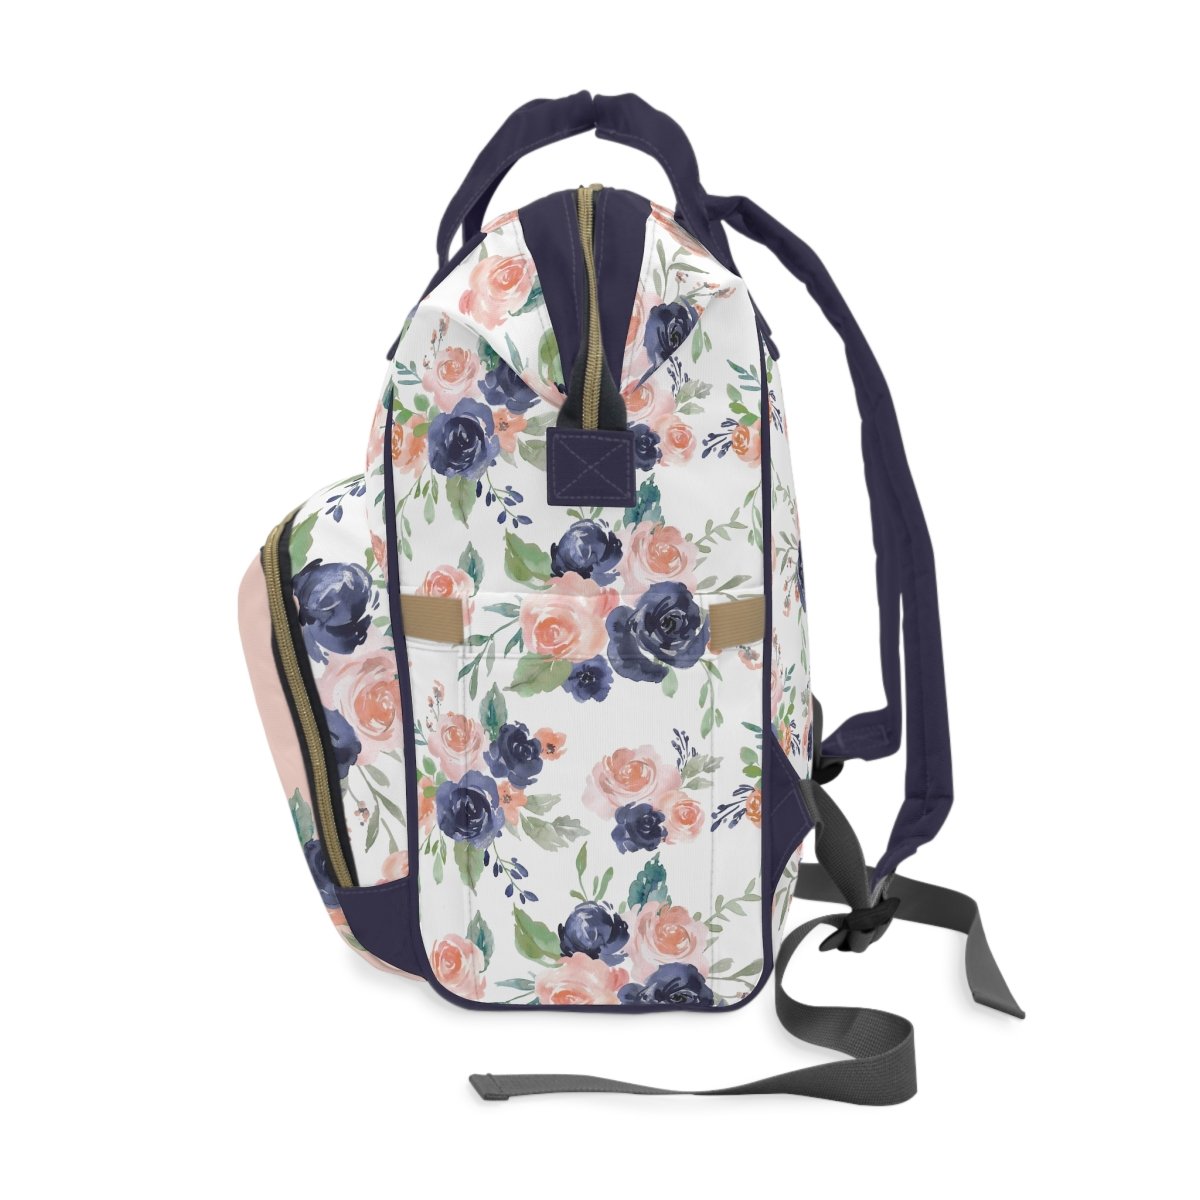 Peach & Navy Floral Personalized Backpack Diaper Bag - gender_girl, Peach & Navy Floral, text